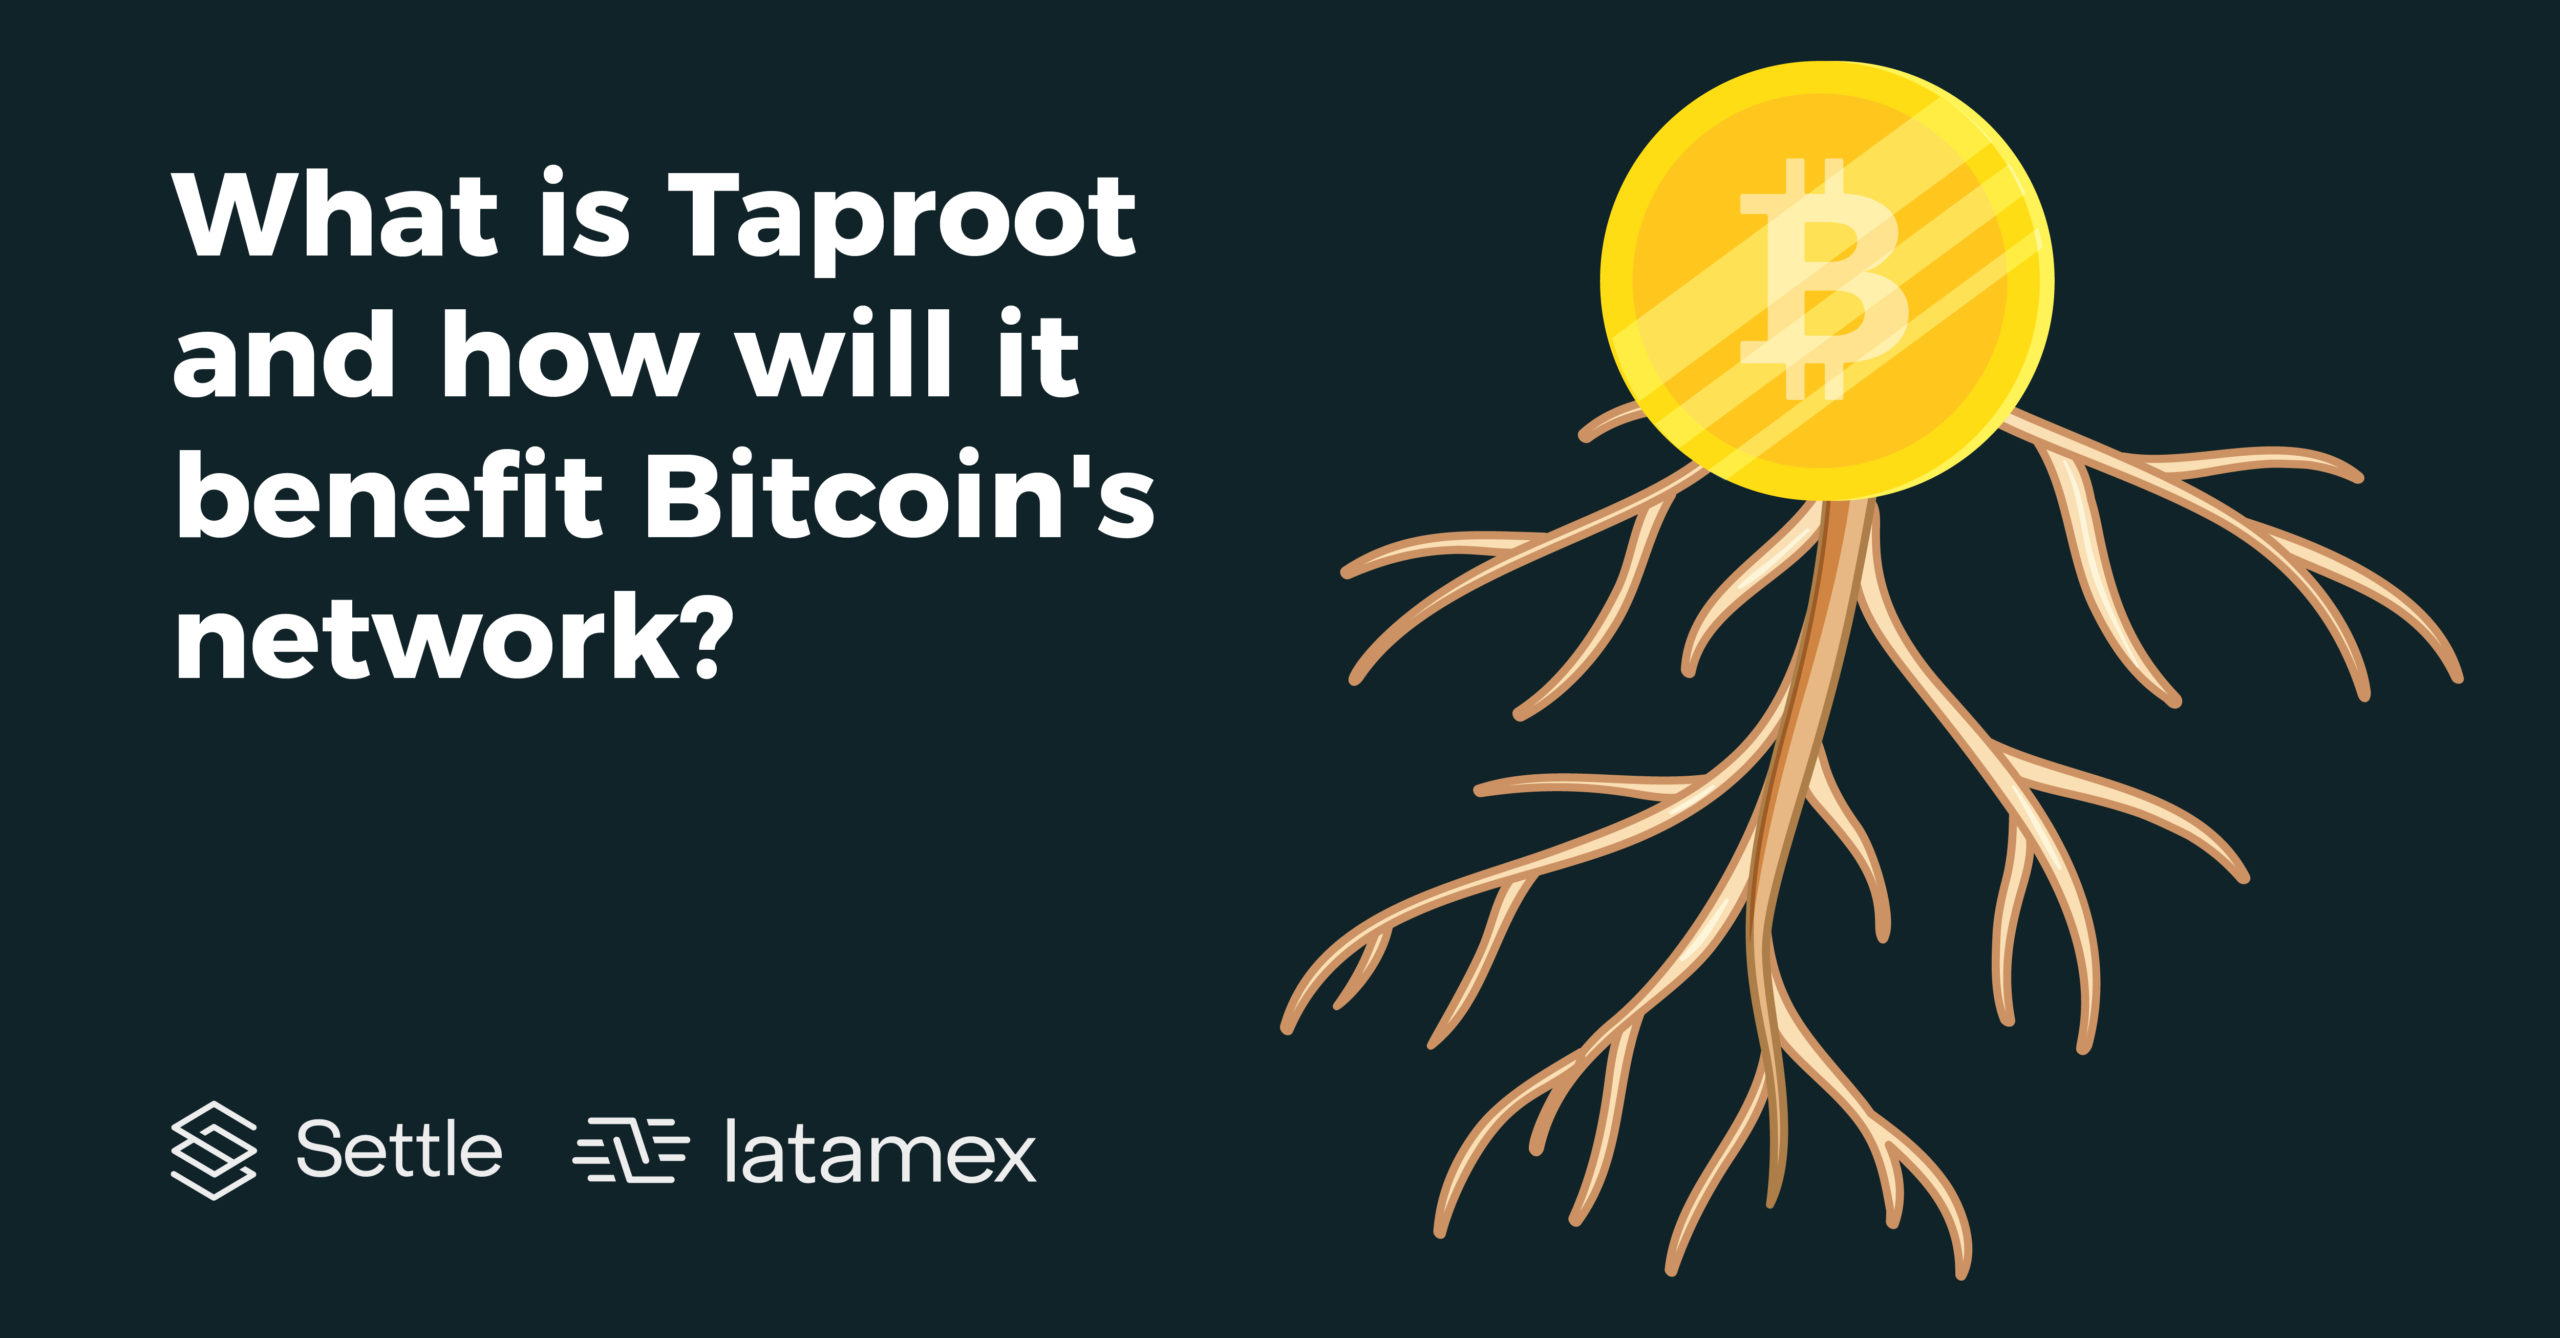 What is taproot? Settle Network, Latamex